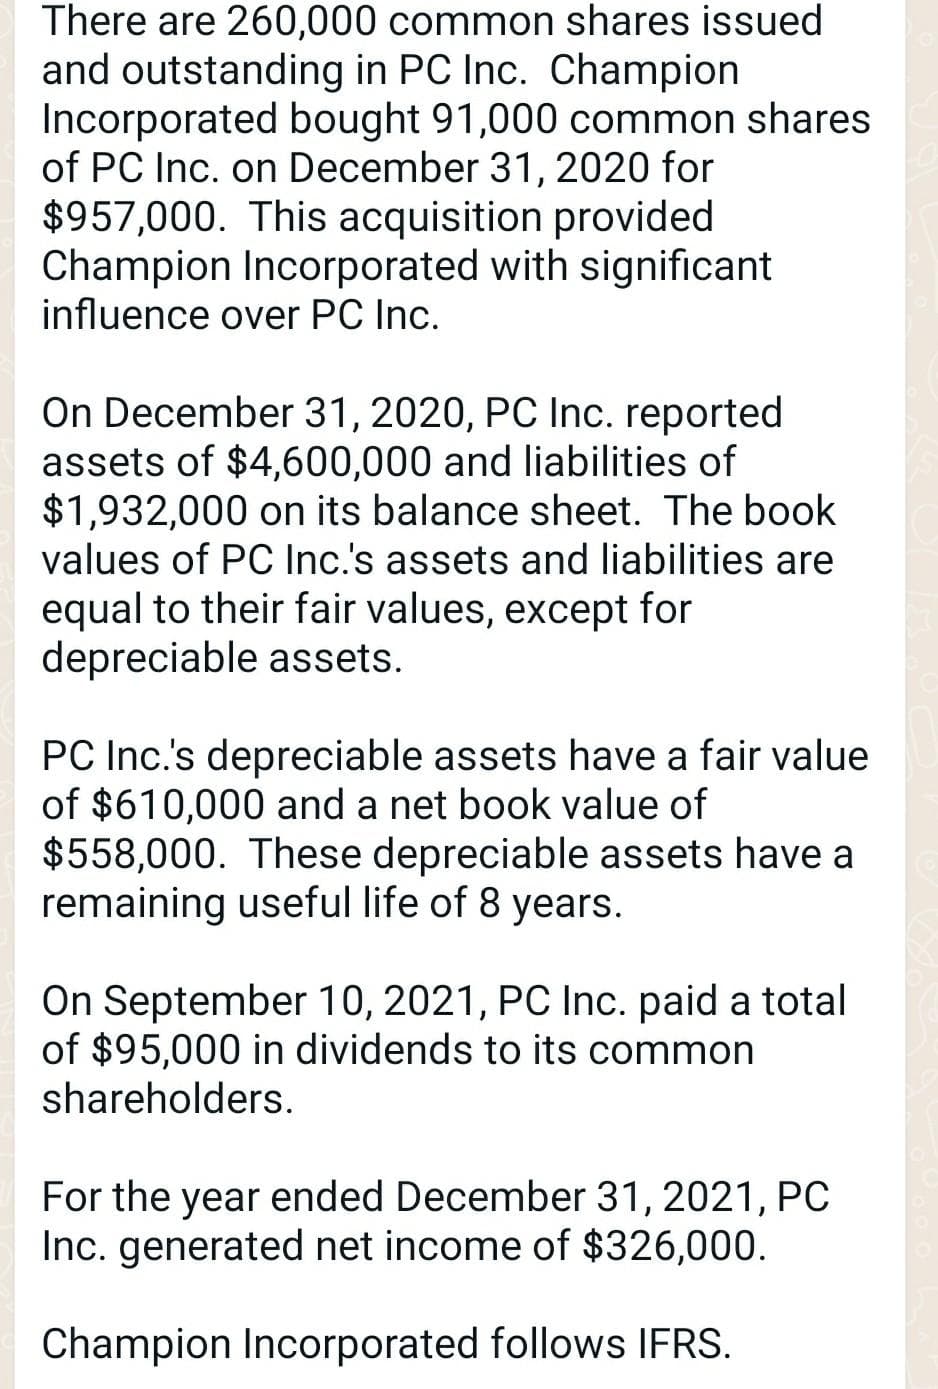 There are 260,000 common shares issued
and outstanding in PC Inc. Champion
Incorporated bought 91,000 common shares
of PC Inc. on December 31, 2020 for
$957,000. This acquisition provided
Champion Incorporated with significant
influence over PC Inc.
On December 31, 2020, PC Inc. reported
assets of $4,600,000 and liabilities of
$1,932,000 on its balance sheet. The book
values of PC Inc.'s assets and liabilities are
equal to their fair values, except for
depreciable assets.
PC Inc.'s depreciable assets have a fair value
of $610,000 and a net book value of
$558,000. These depreciable assets have a
remaining useful life of 8 years.
On September 10, 2021, PC Inc. paid a total
of $95,000 in dividends to its common
shareholders.
For the year ended December 31, 2021, PC
Inc. generated net income of $326,000.
Champion Incorporated follows IFRS.
